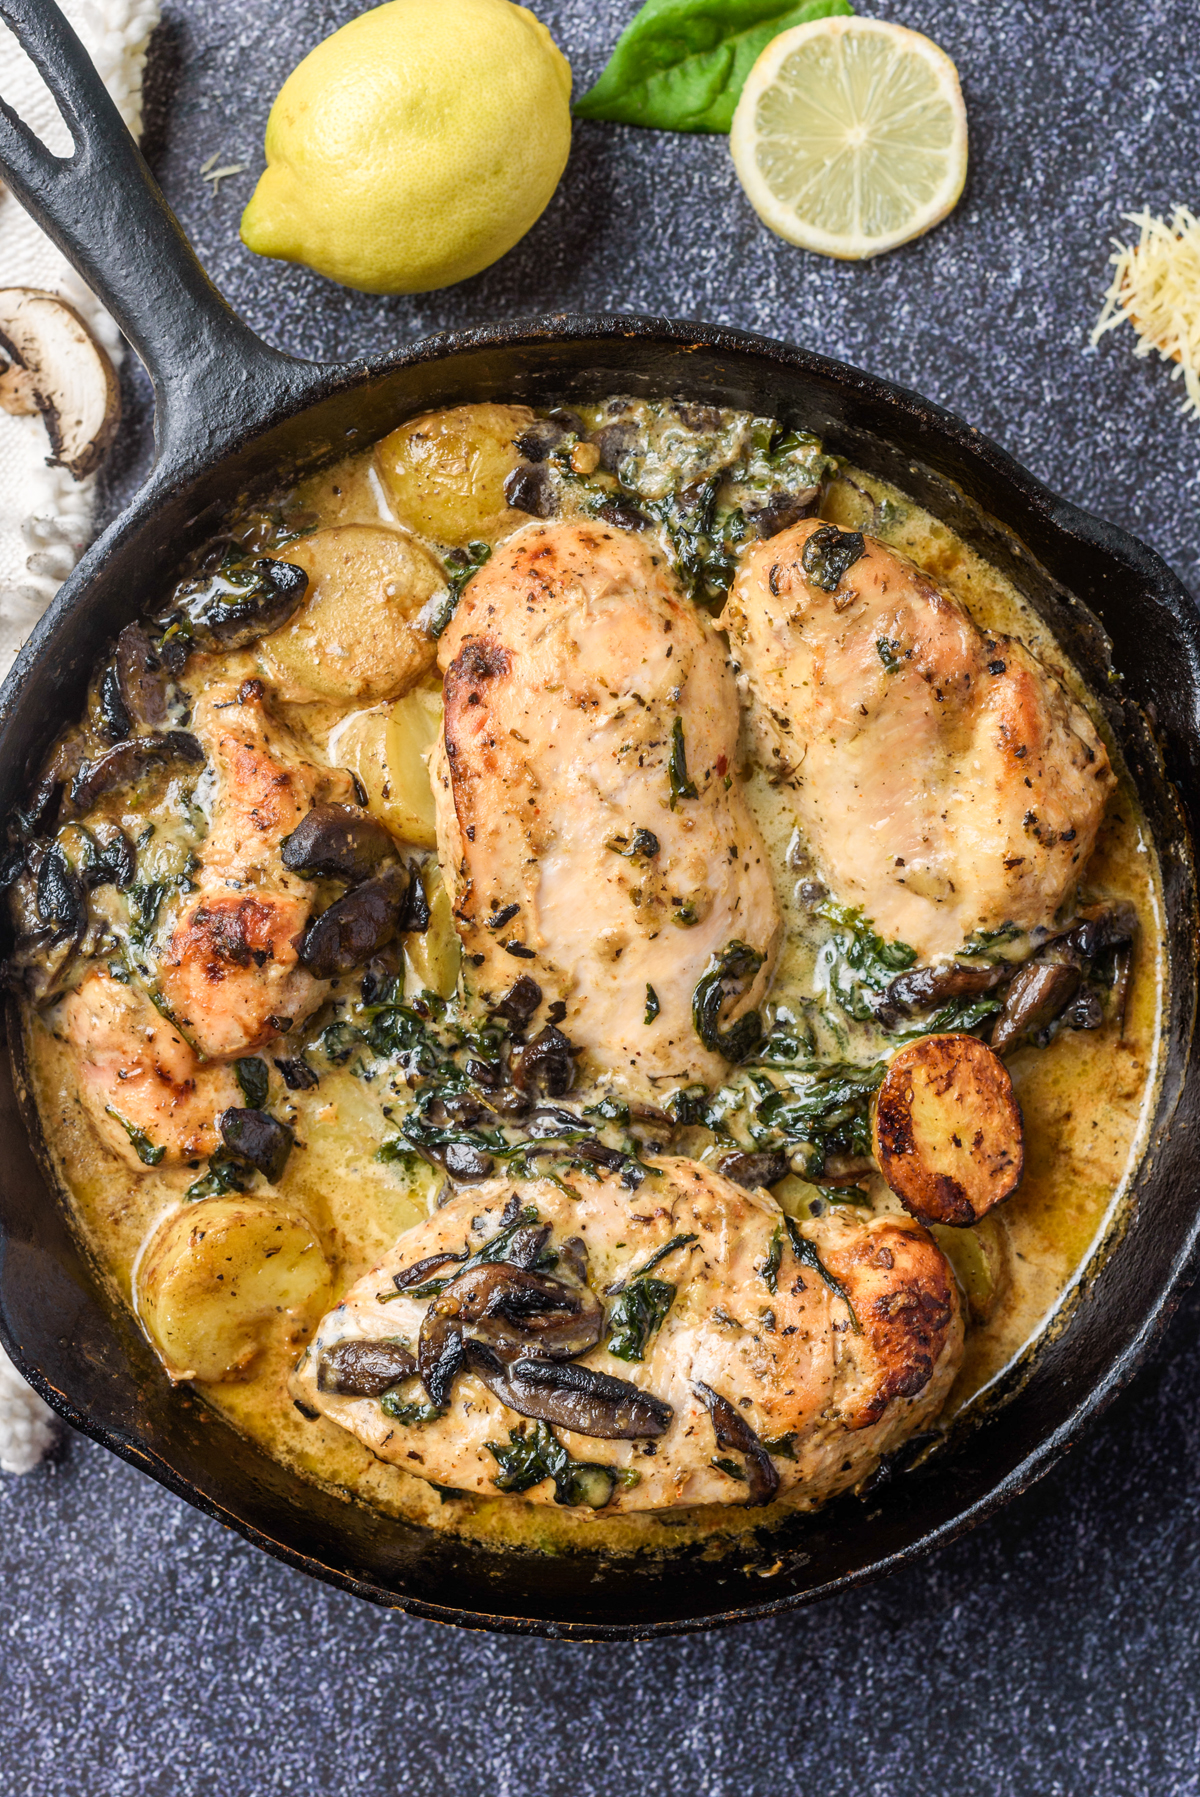 4 chicken breasts, mushrooms, baby potatoes and spinach all cooked in a cast iron pan on a dark background 